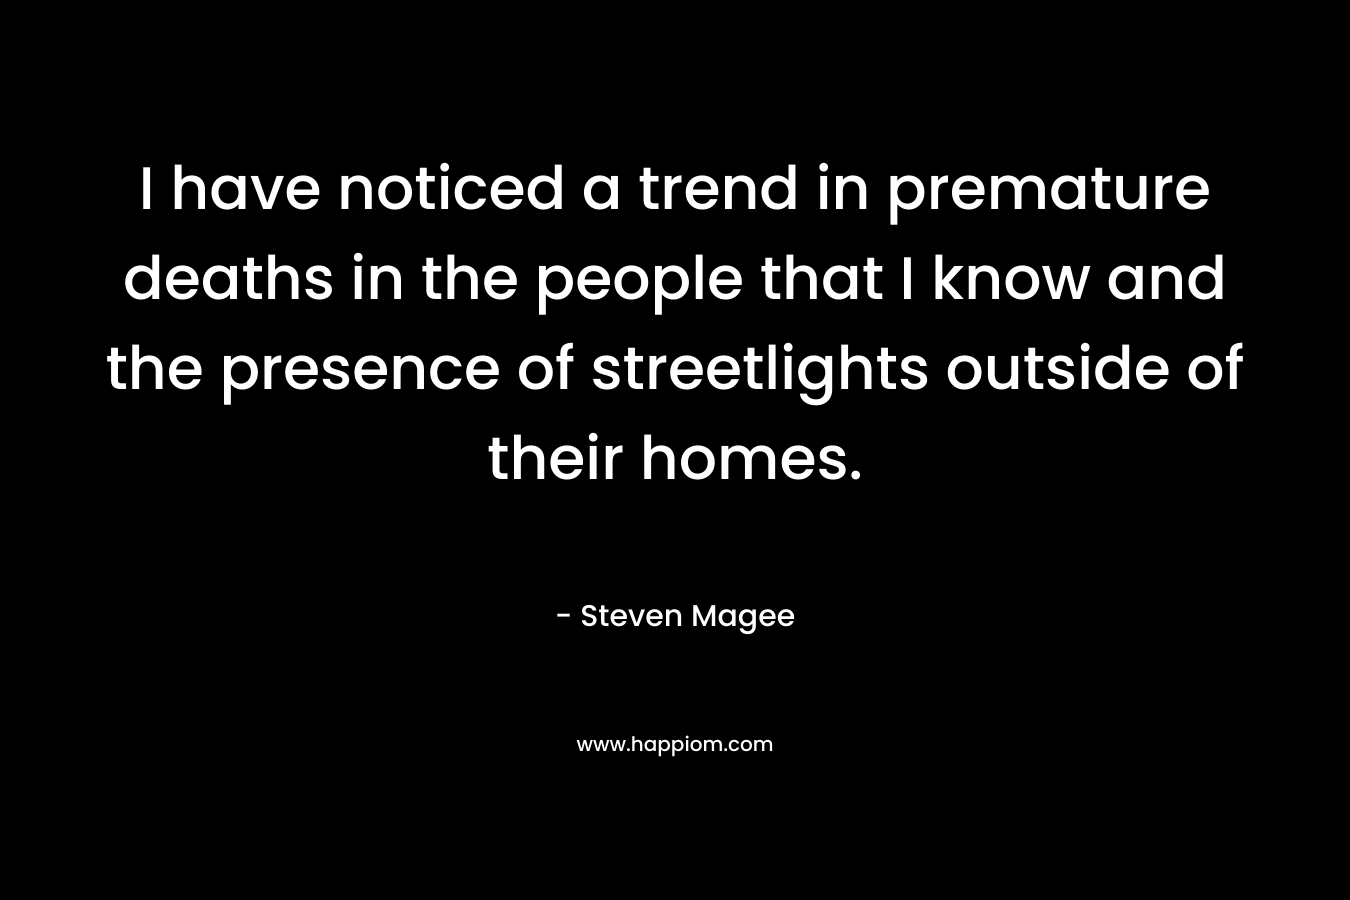 I have noticed a trend in premature deaths in the people that I know and the presence of streetlights outside of their homes.